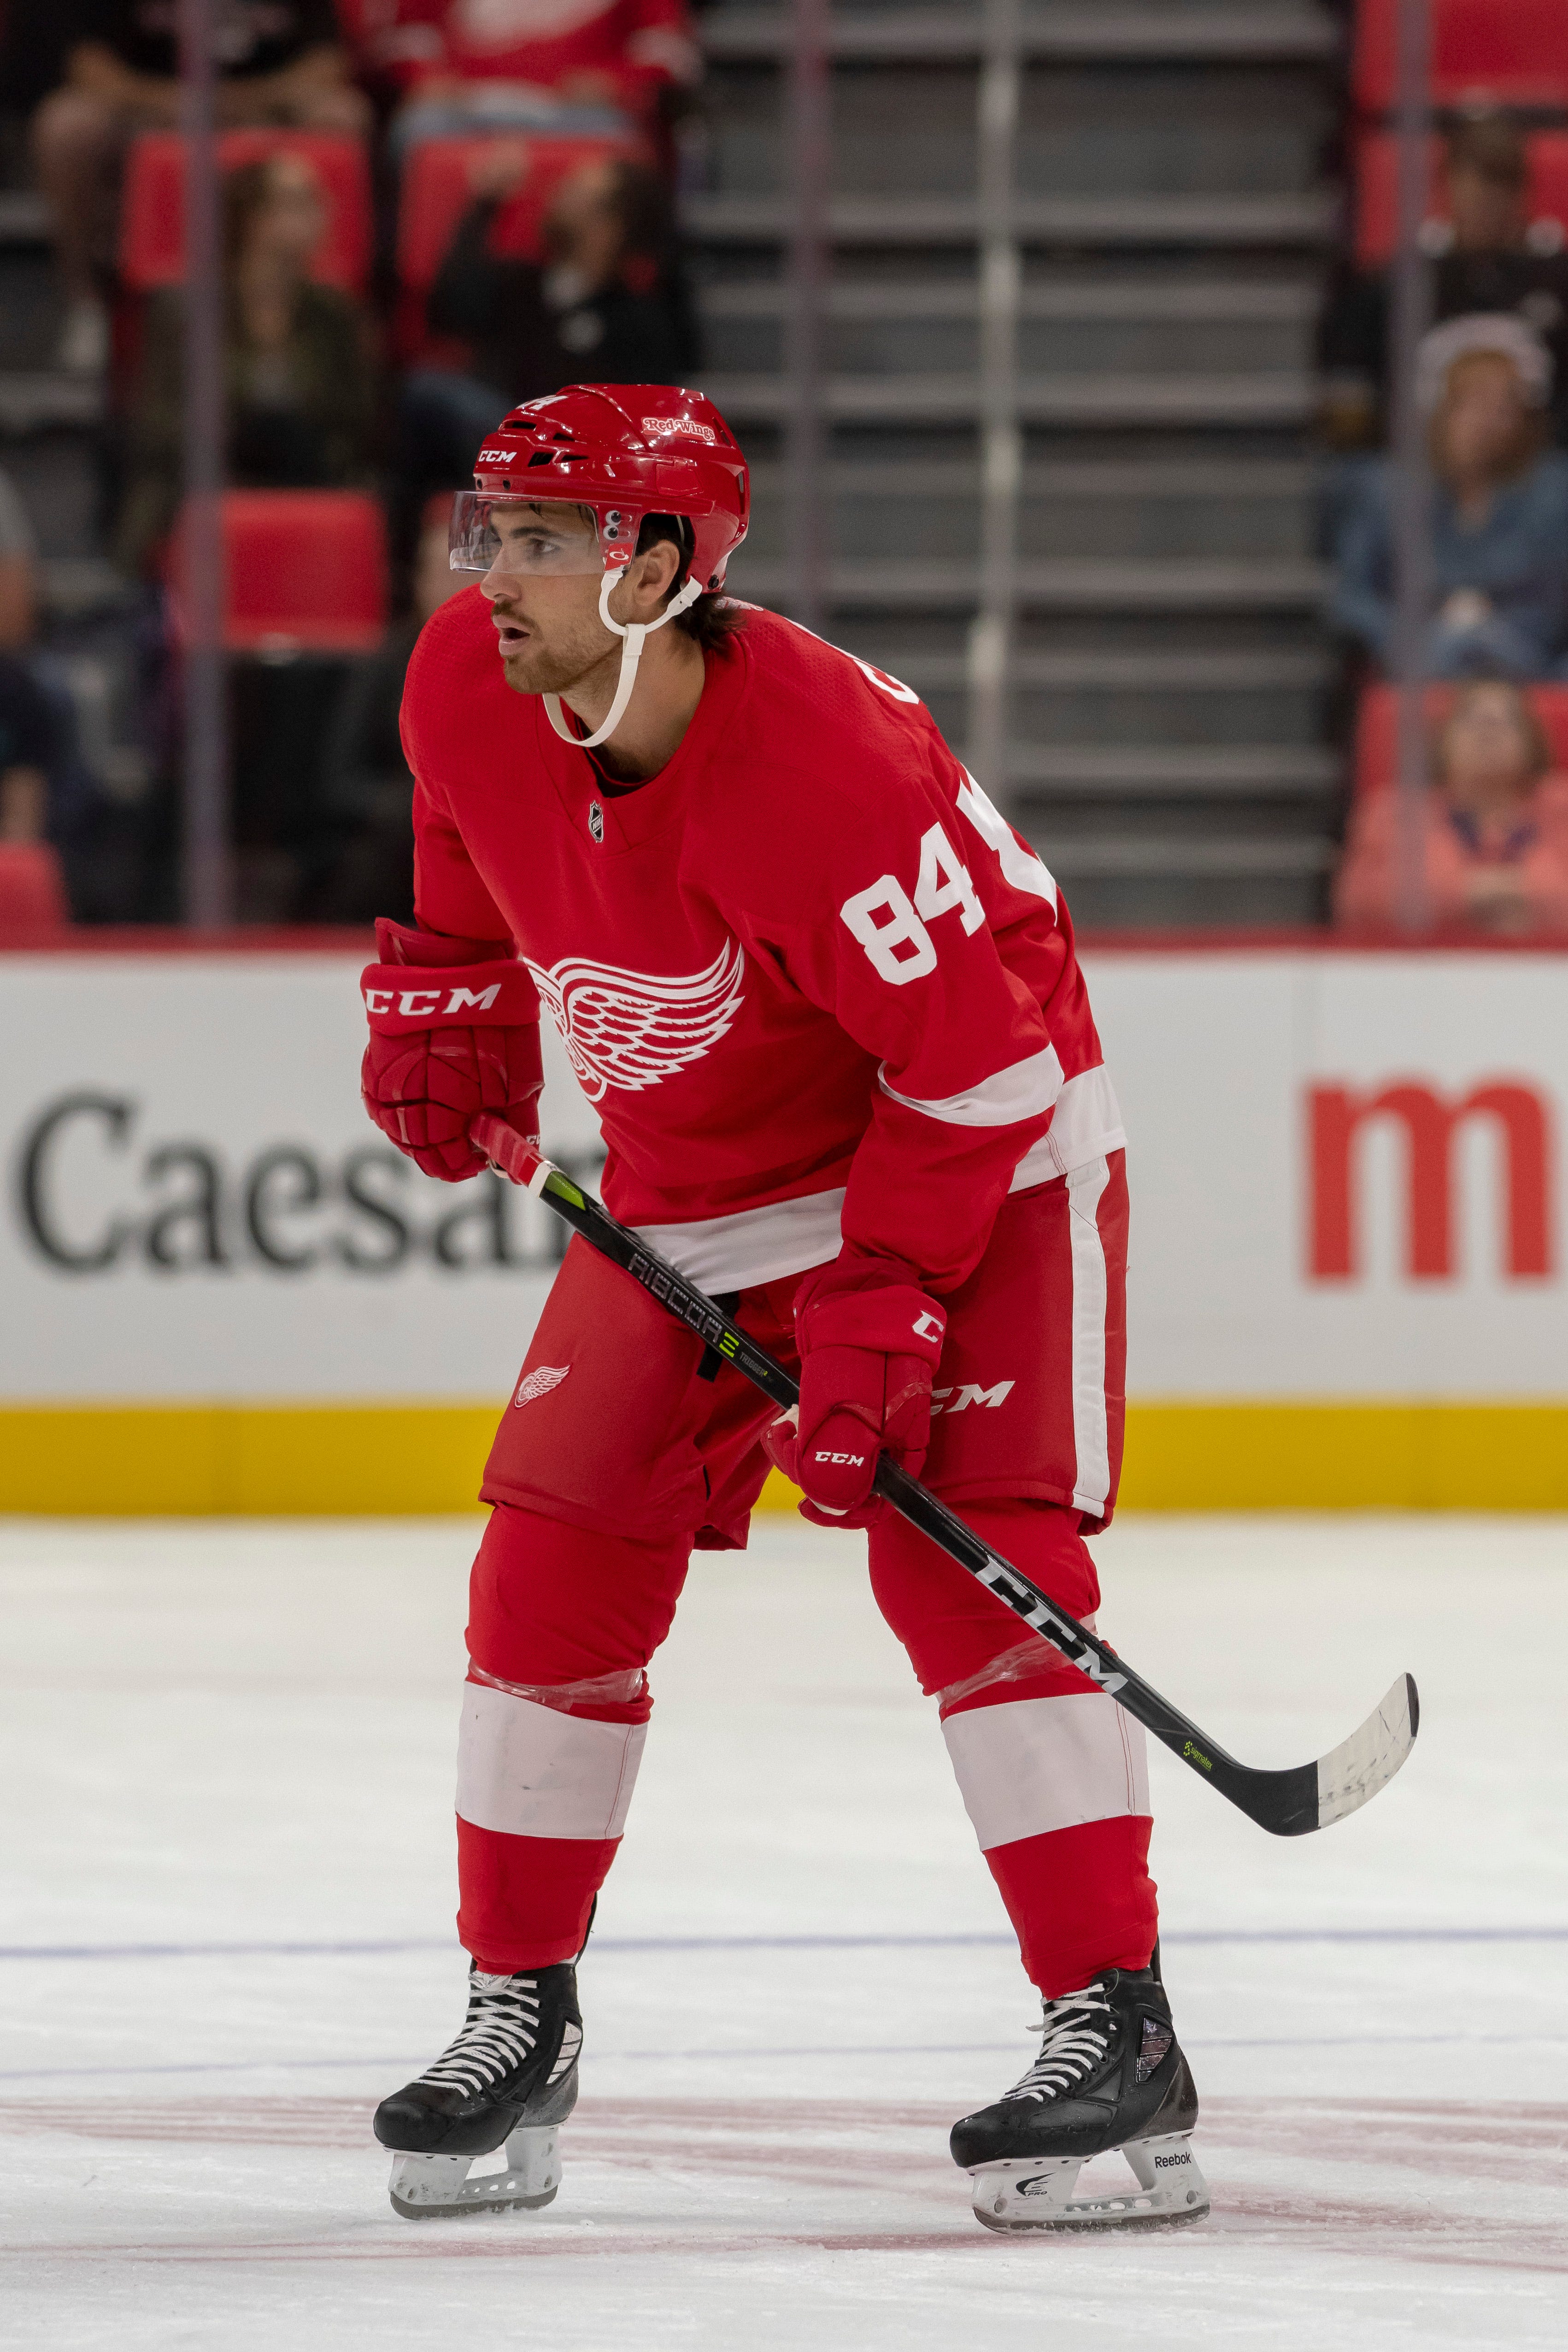 50. Jake Chelios, defenseman. Played well in Grand Rapids this season, and earned a late-season promotion to the Wings. Serviceable guy to have in your organization, efficient and good on the defensive end.